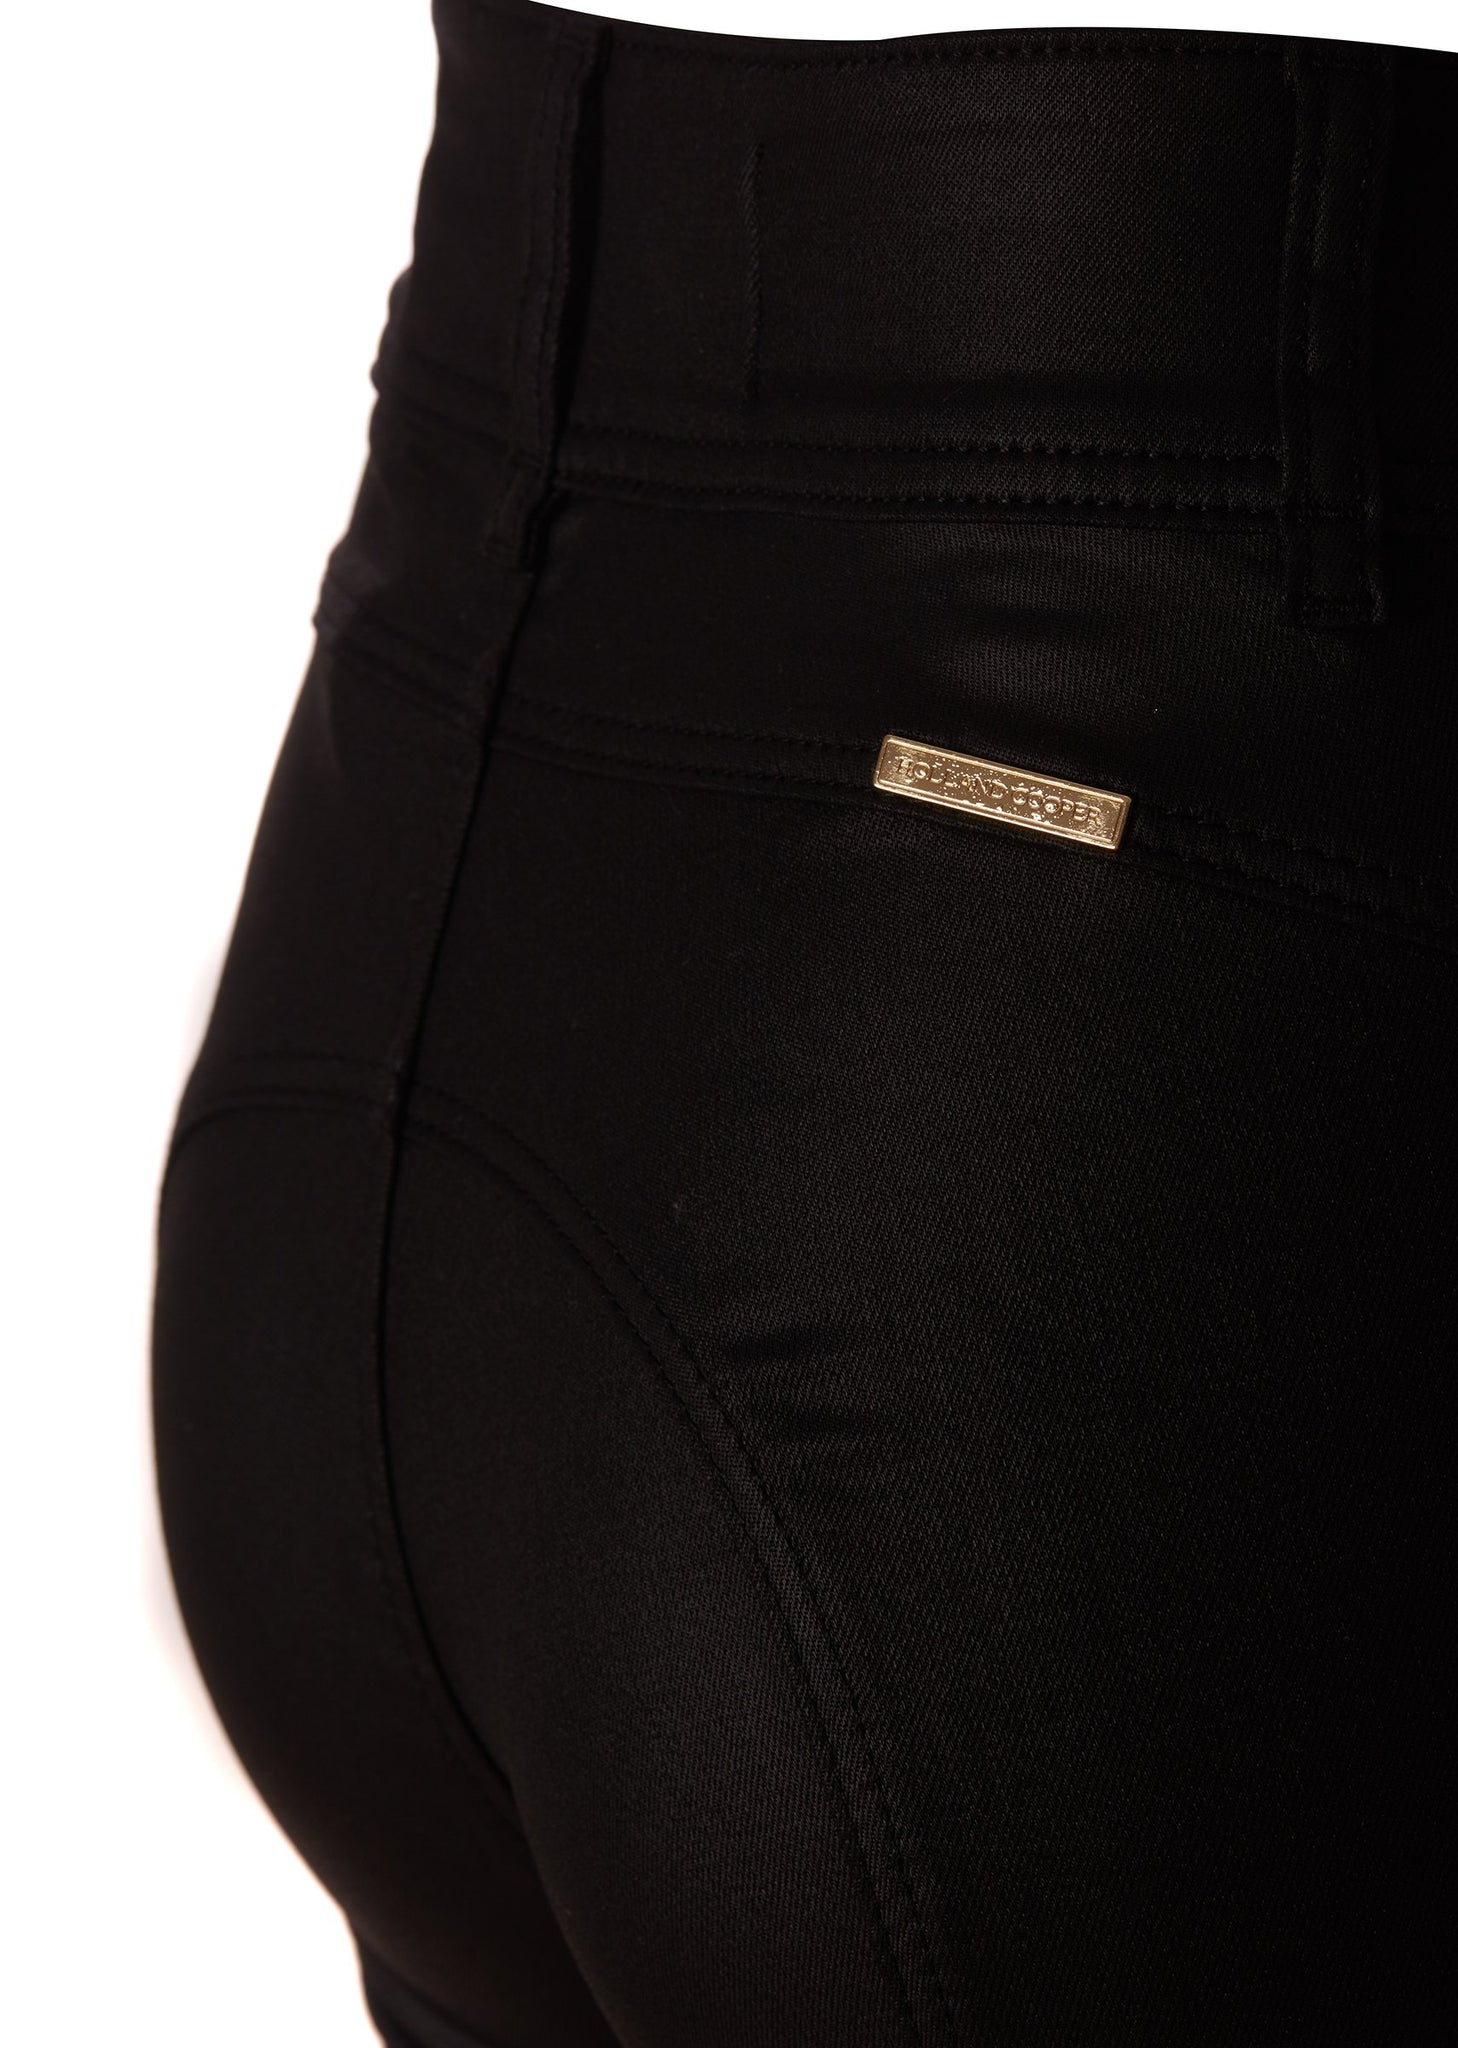 gold hardware on back of womens high rise black coated skinny jean for a waxed look with jodhpur style seams and two open zip pockets to the front with HC branded pulls